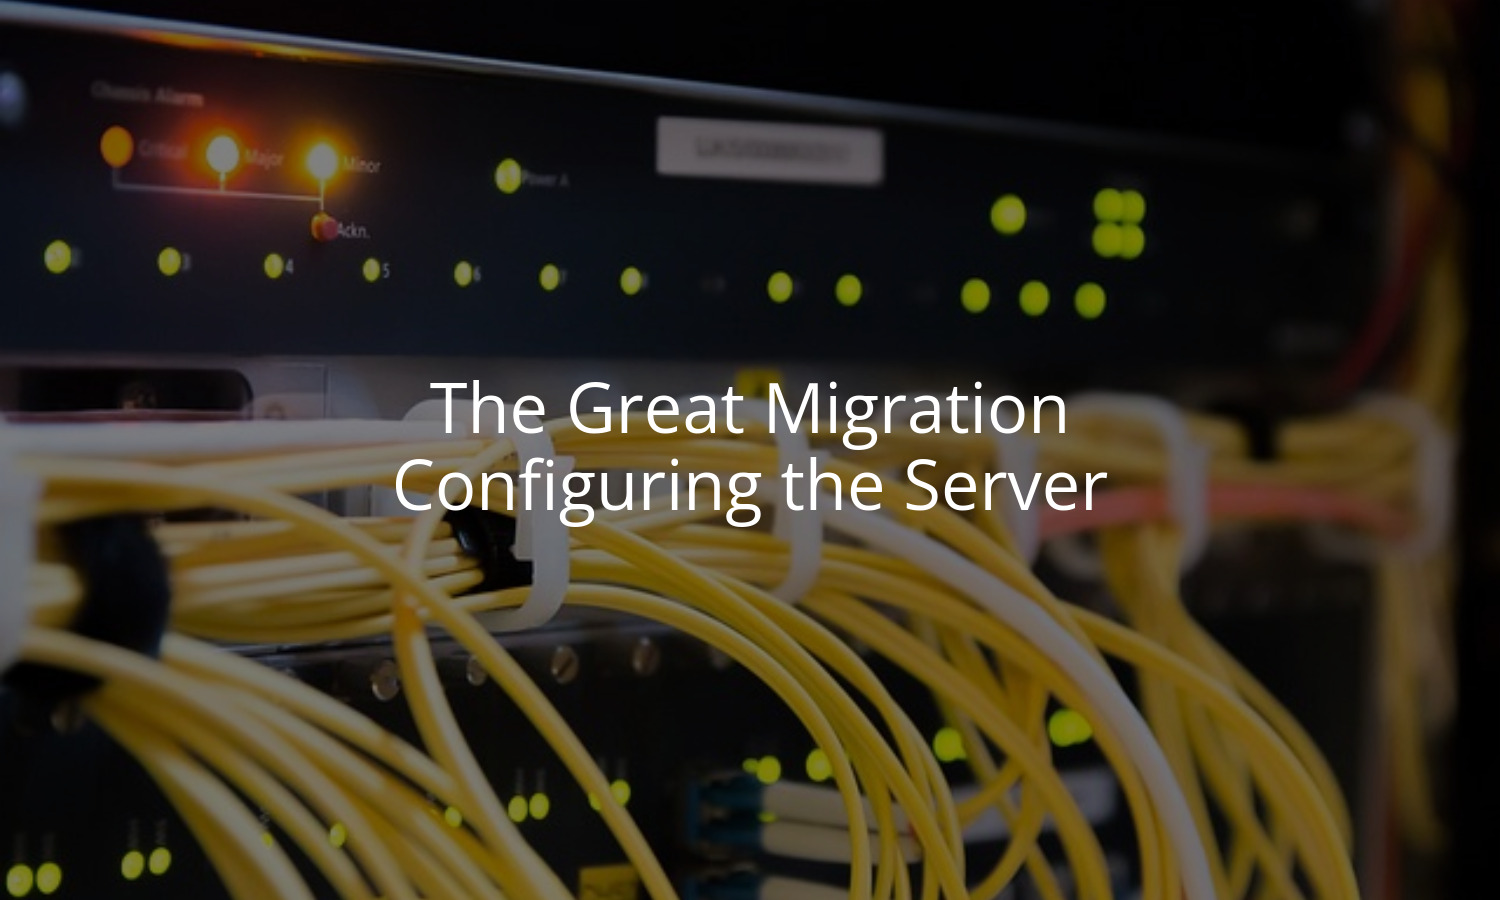 The Great Migration: Configuring the Server